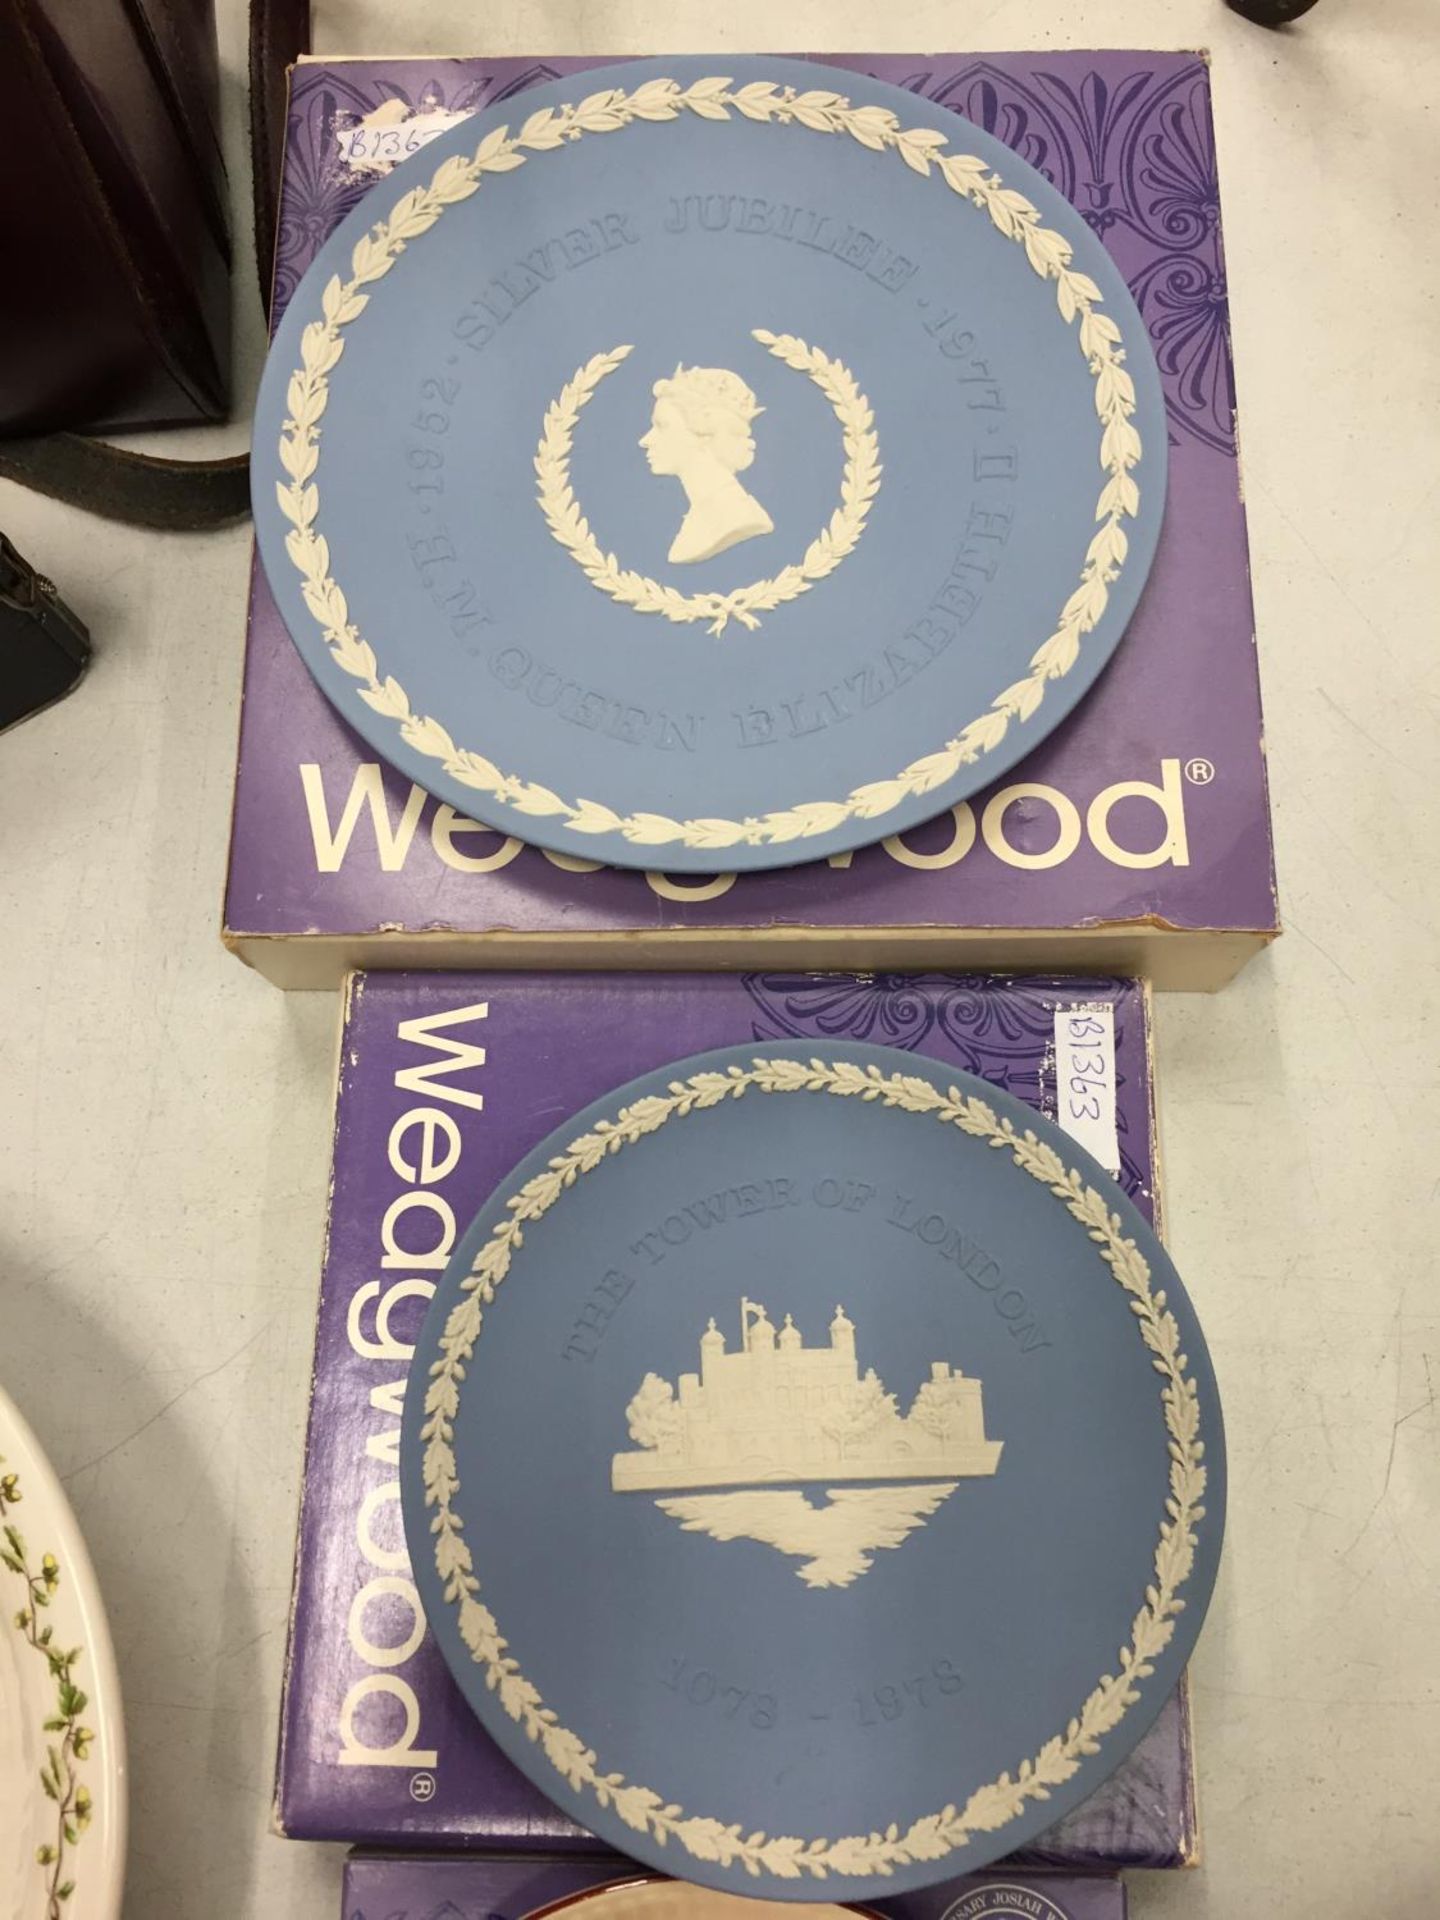 THREE CELEBRATION WEDGEWOOD PLATES THE QUEENS SILVER JUBILEE THE TOWER OF LONDON 1078-1978 250TH - Image 3 of 3